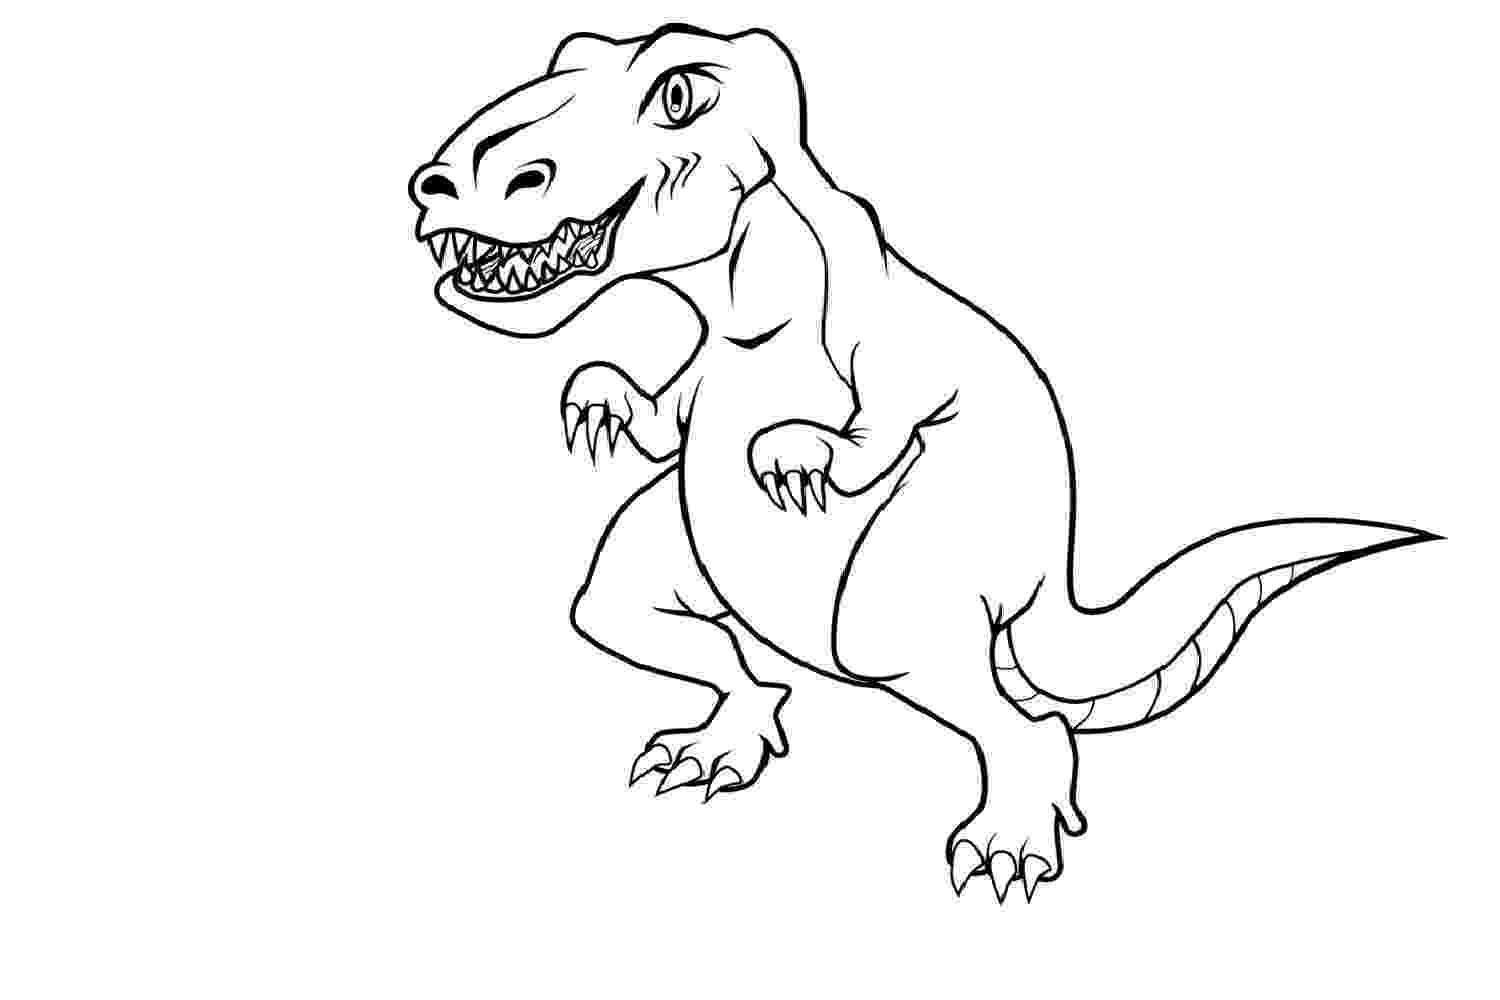 dinosaurs pictures dinosaurs to download ba dinosaurs kids coloring pages dinosaurs pictures 